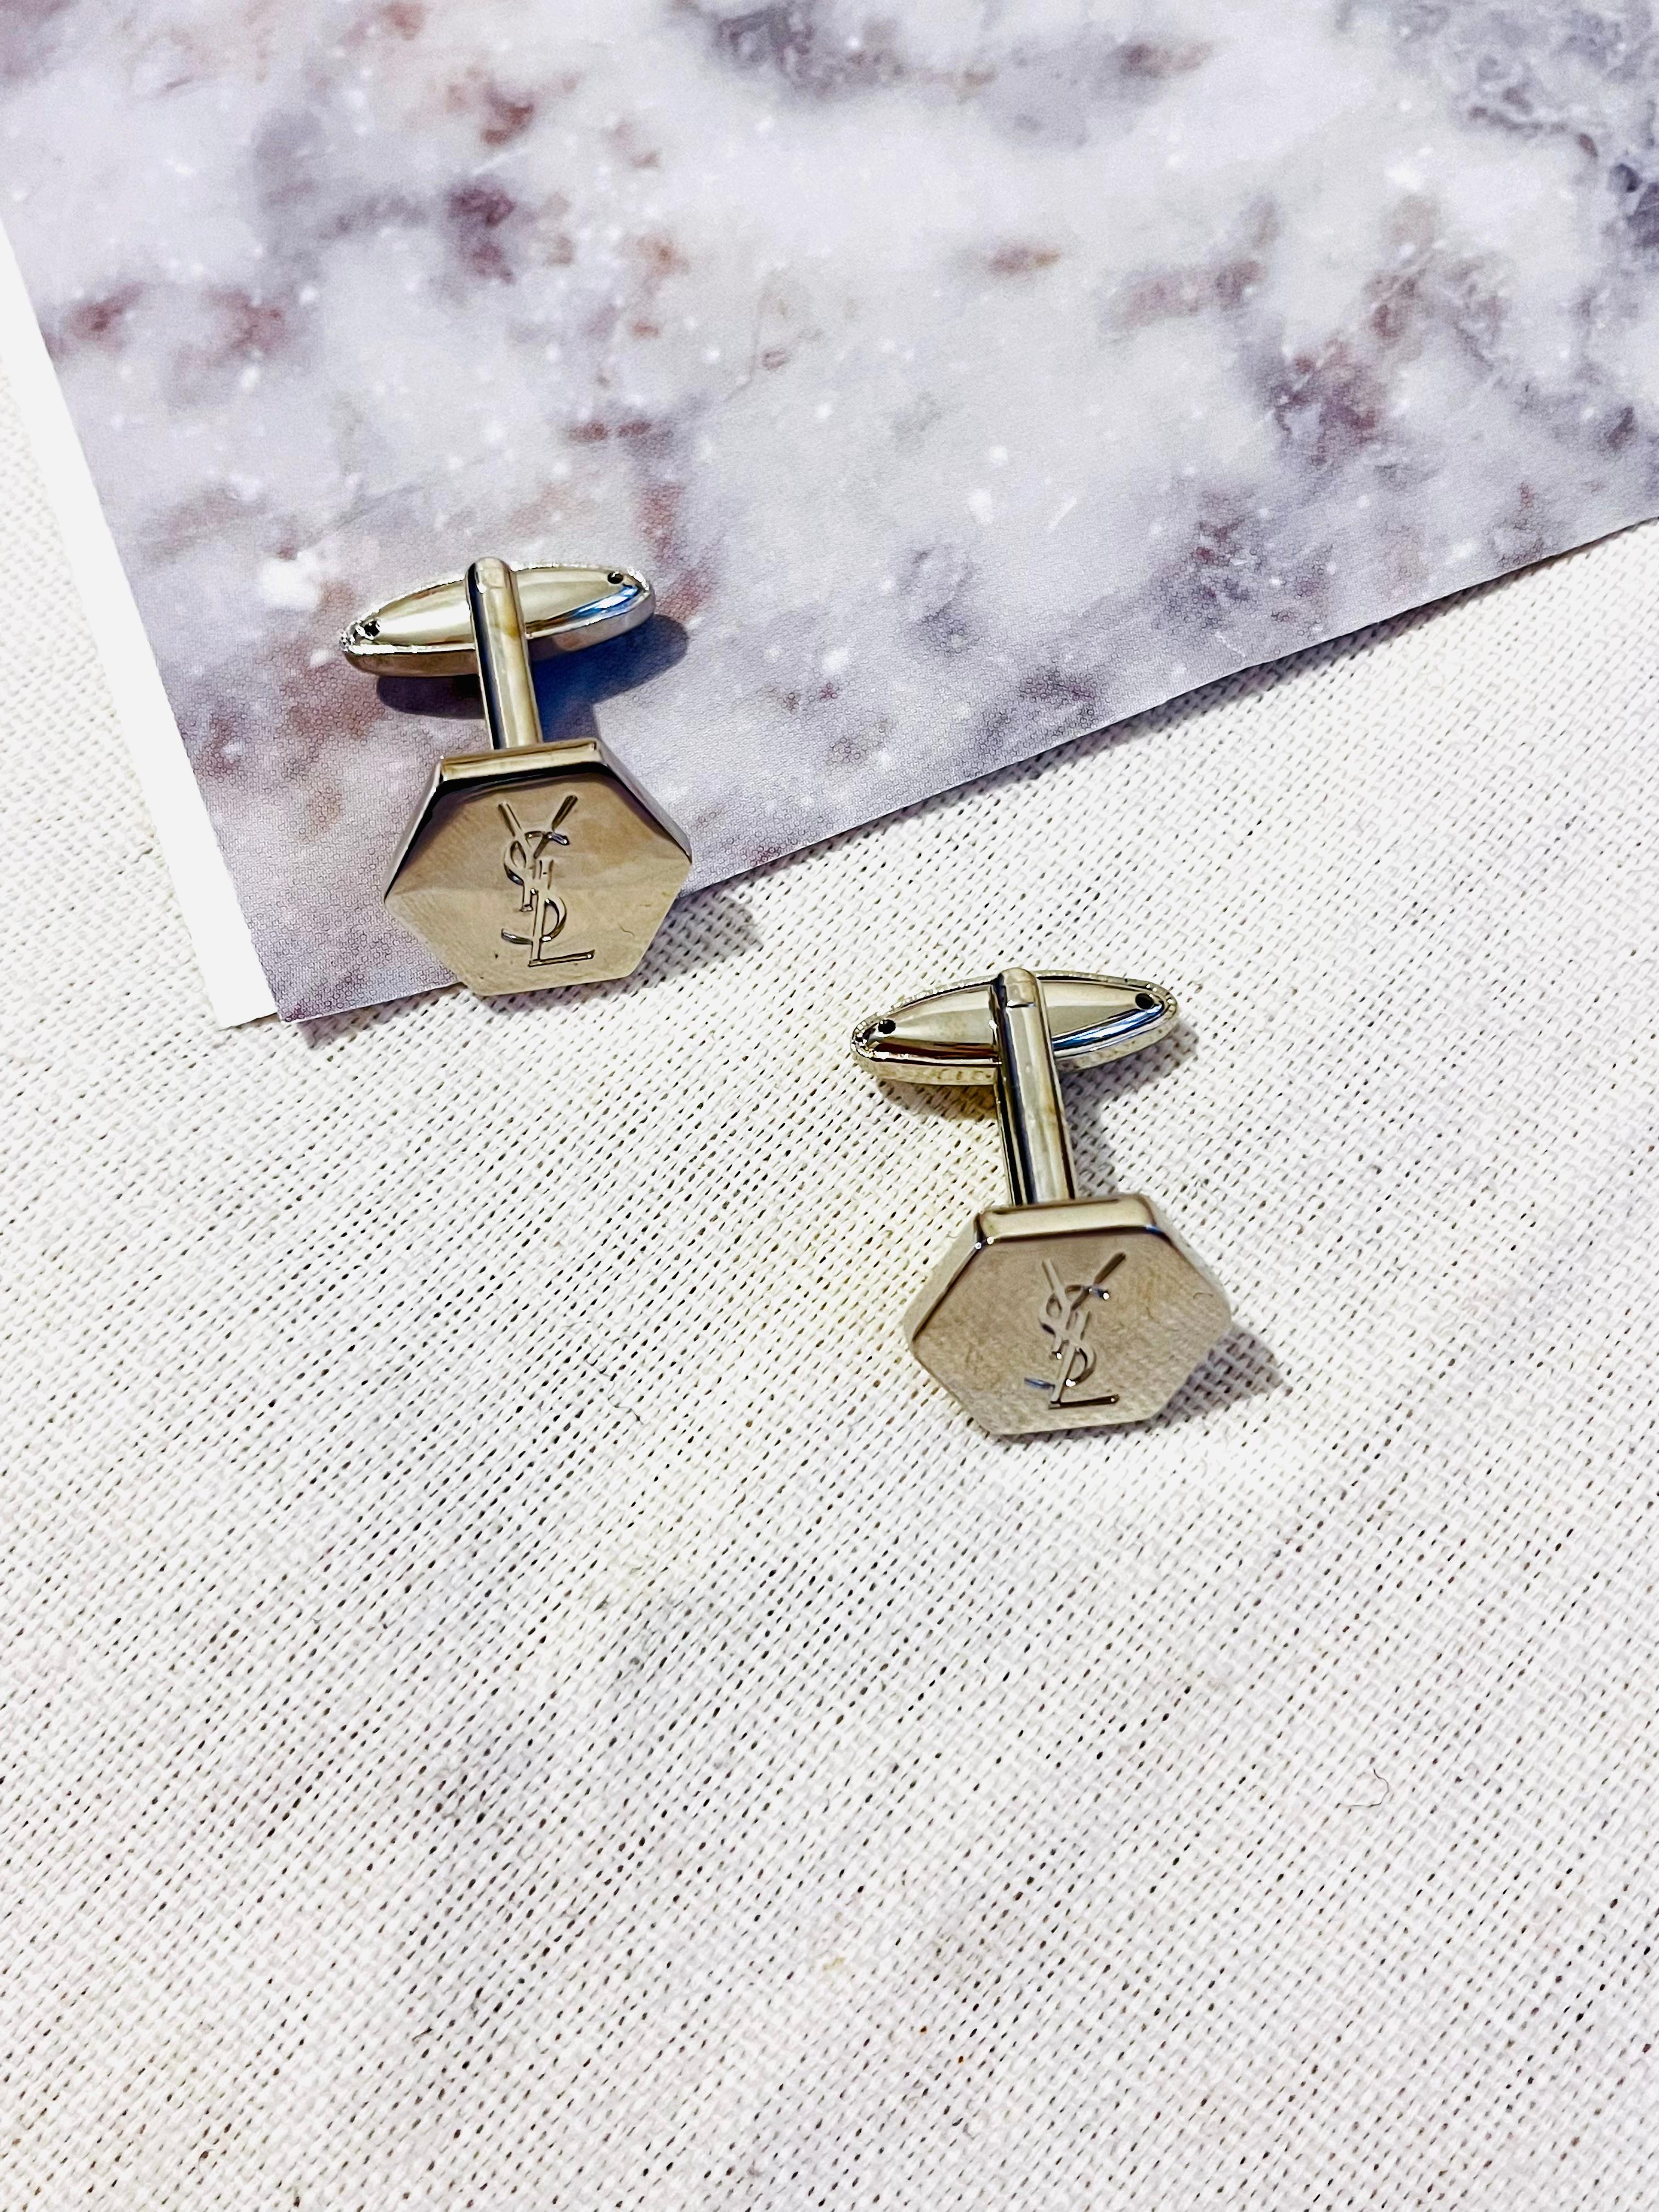 Yves Saint Laurent Classic Logo Hallmark Monogram YSL Hexagon Cufflinks, Silver Plated

Very excellent condition. Some Light scratches, barely noticeable. 100% Genuine.

Hexagon pendant size: 1.5*1.7 cm.

Weight: 5 g/each.
_ _ _

Great for everyday